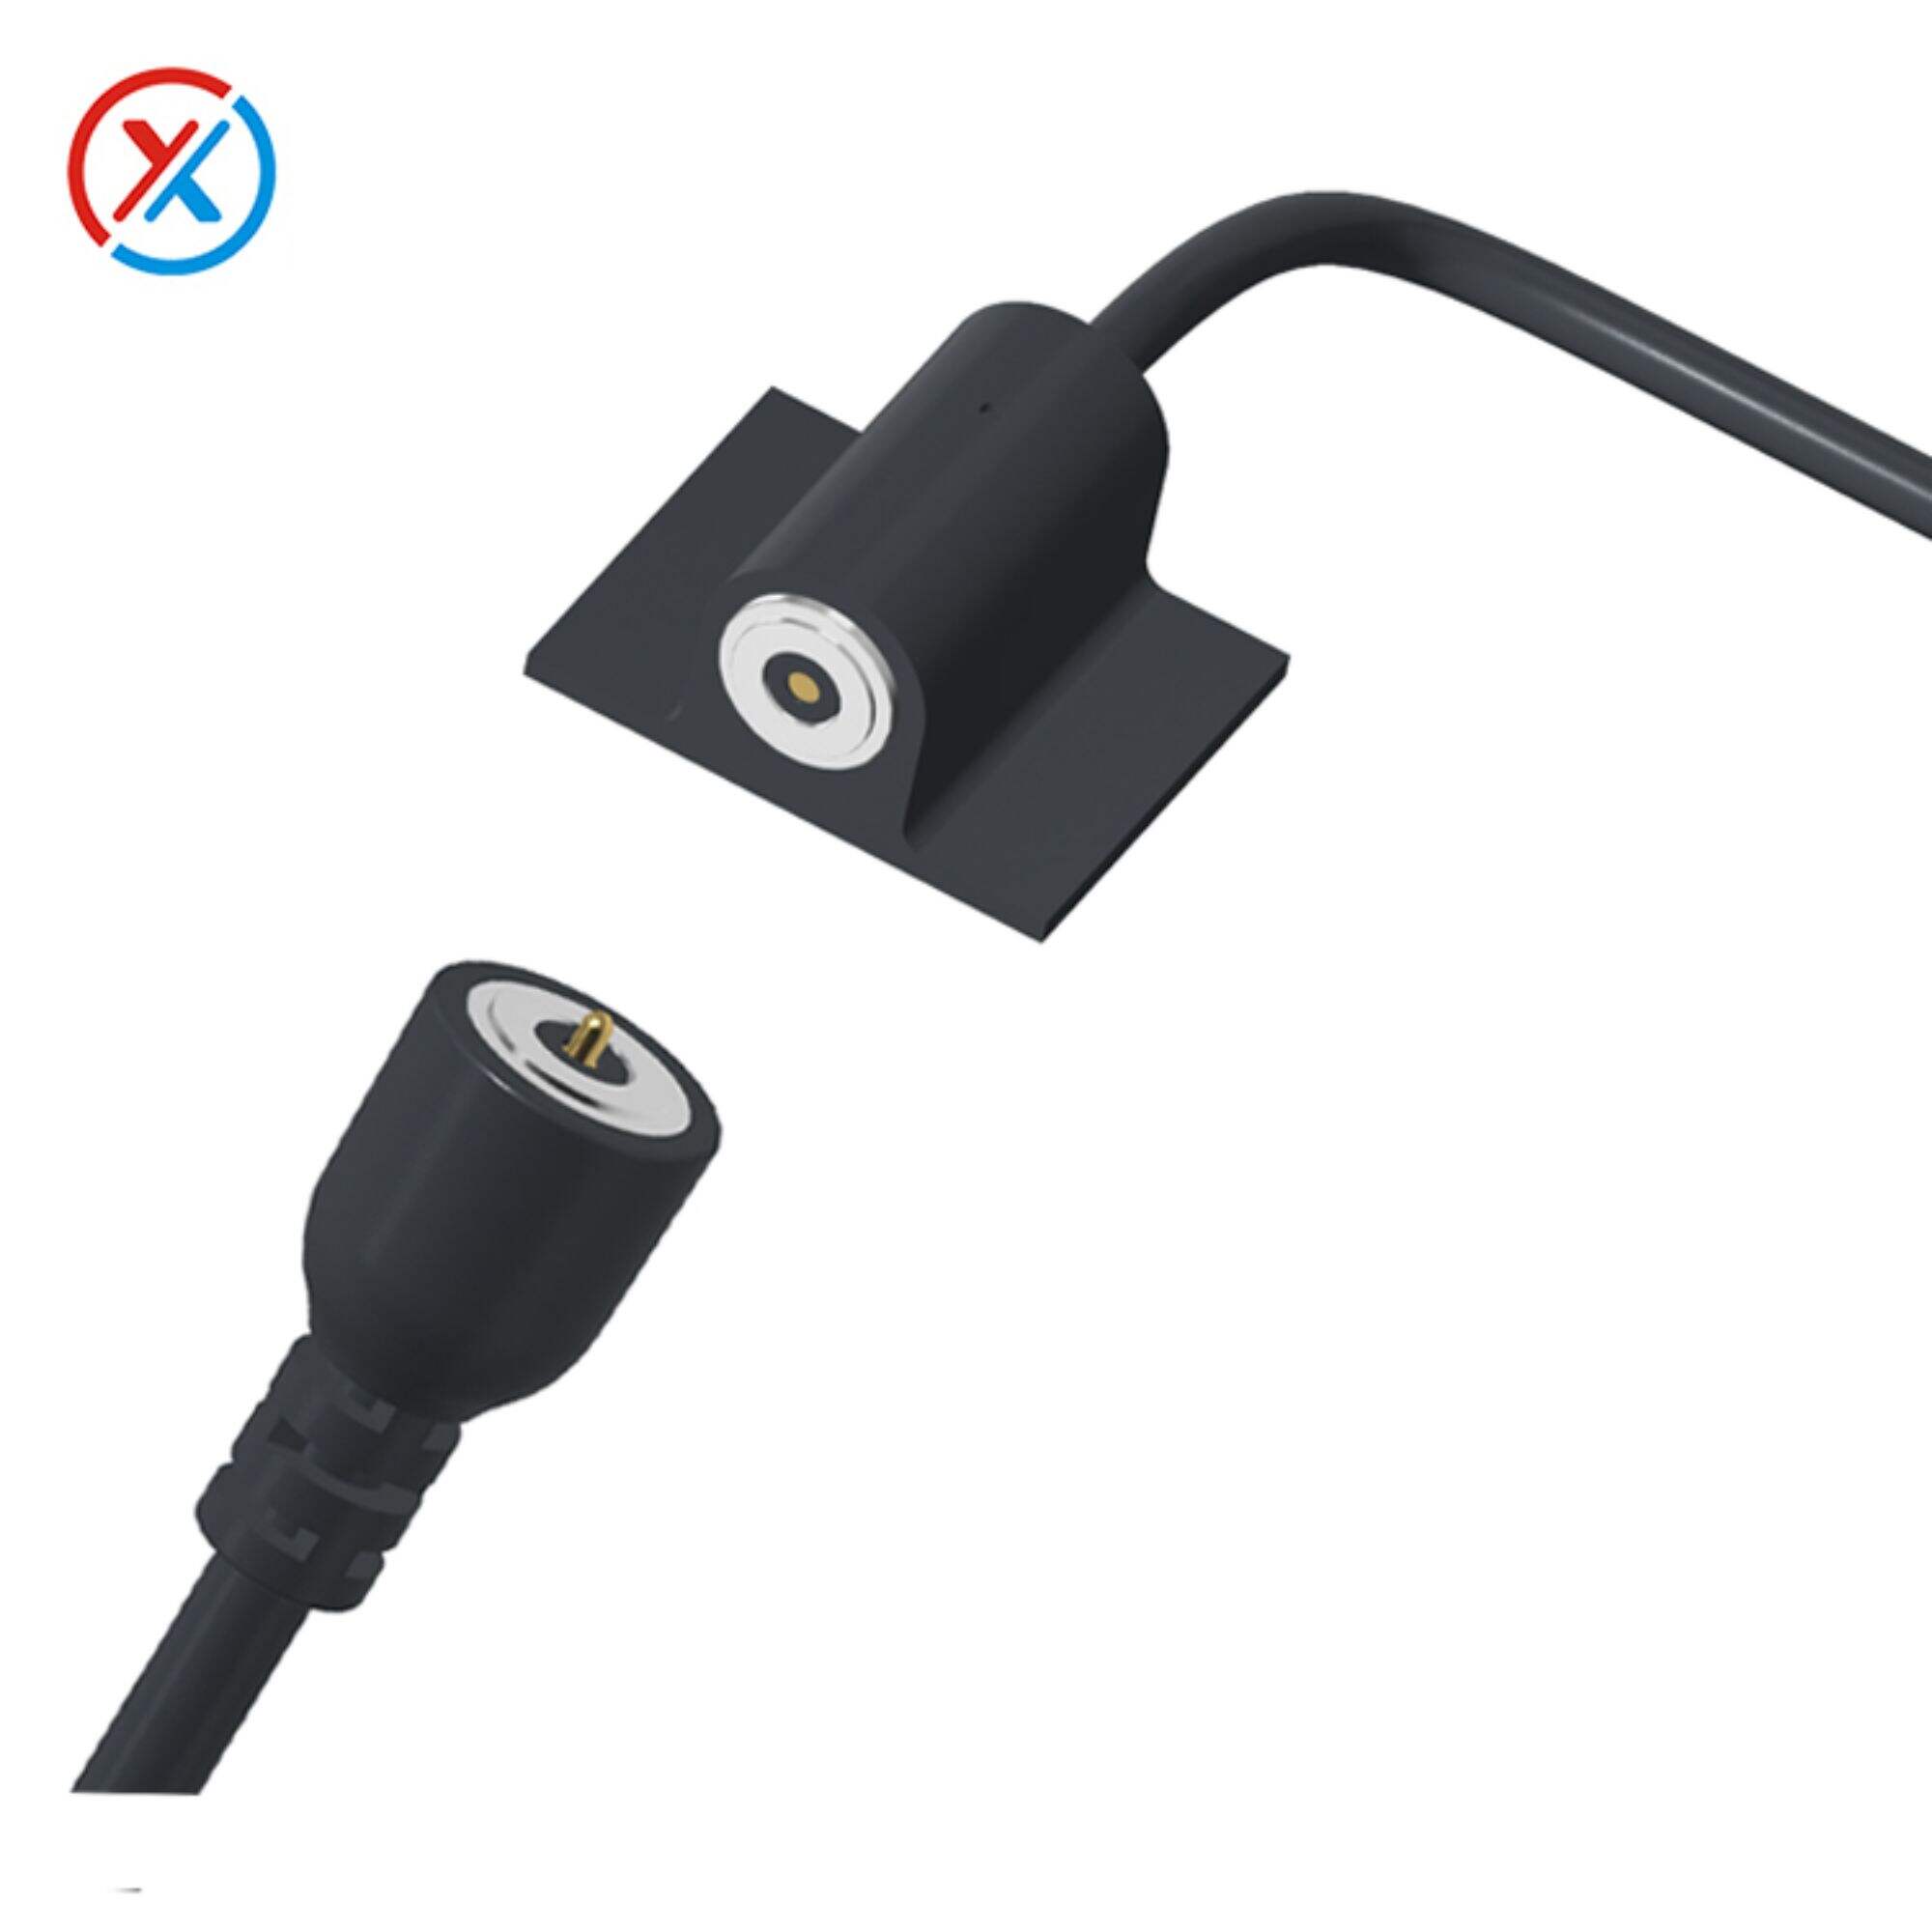  8.0MM Pogo pin Magnetic Cable Rotundity Magnetic male and female charging cable China brand sell like hot cakes